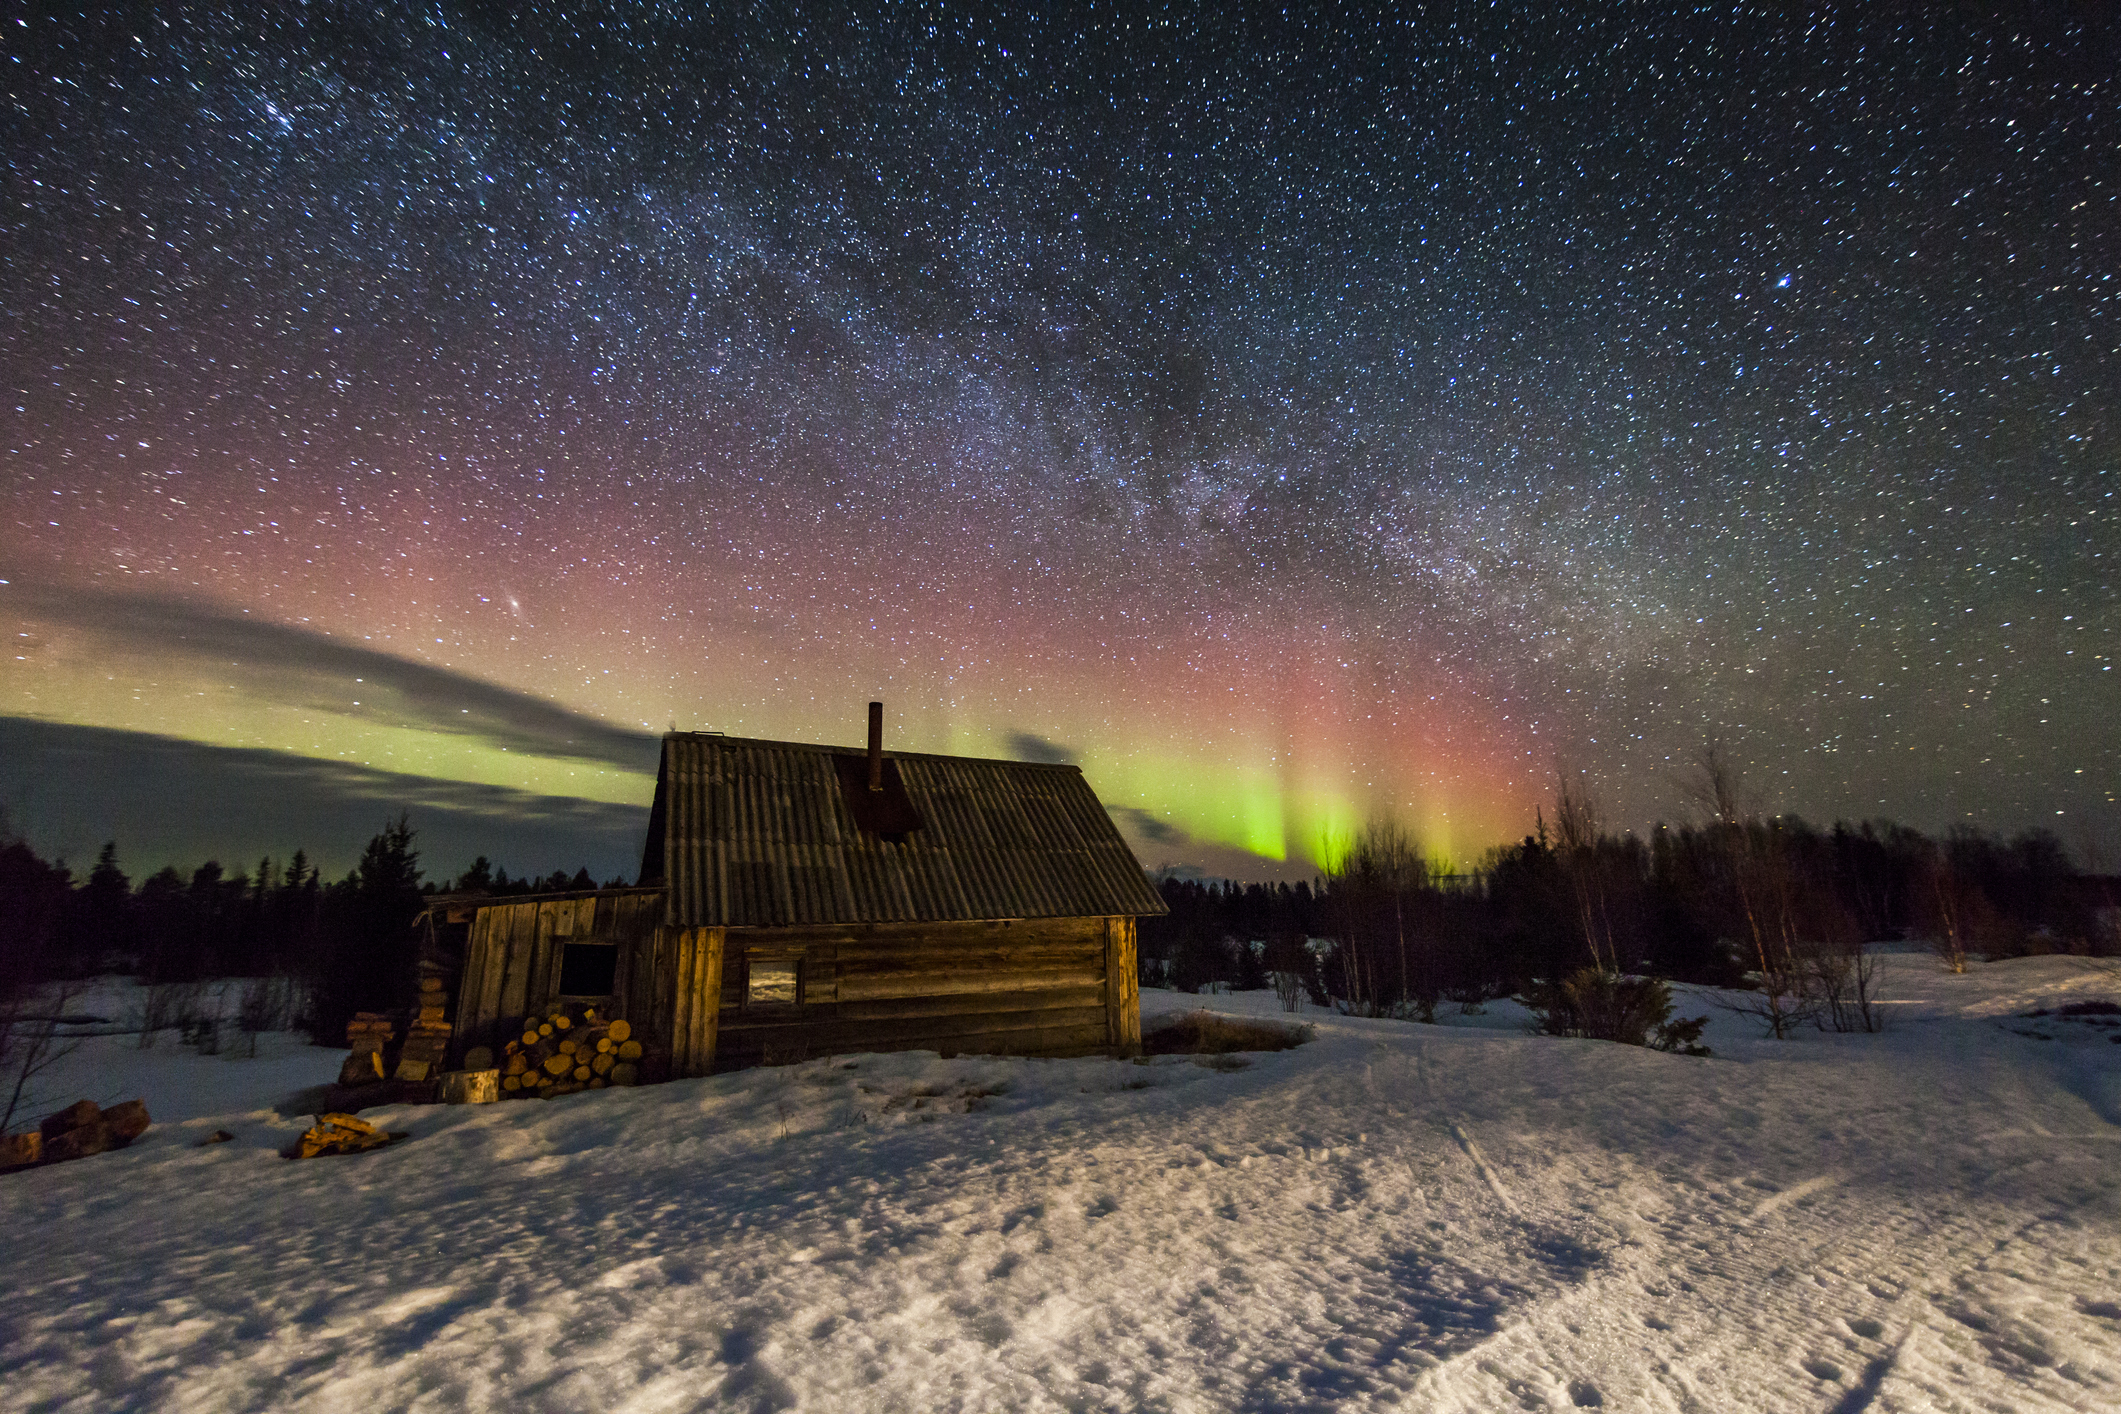 Auroras can be seen over a cabin in the Arctic during polar twilight.